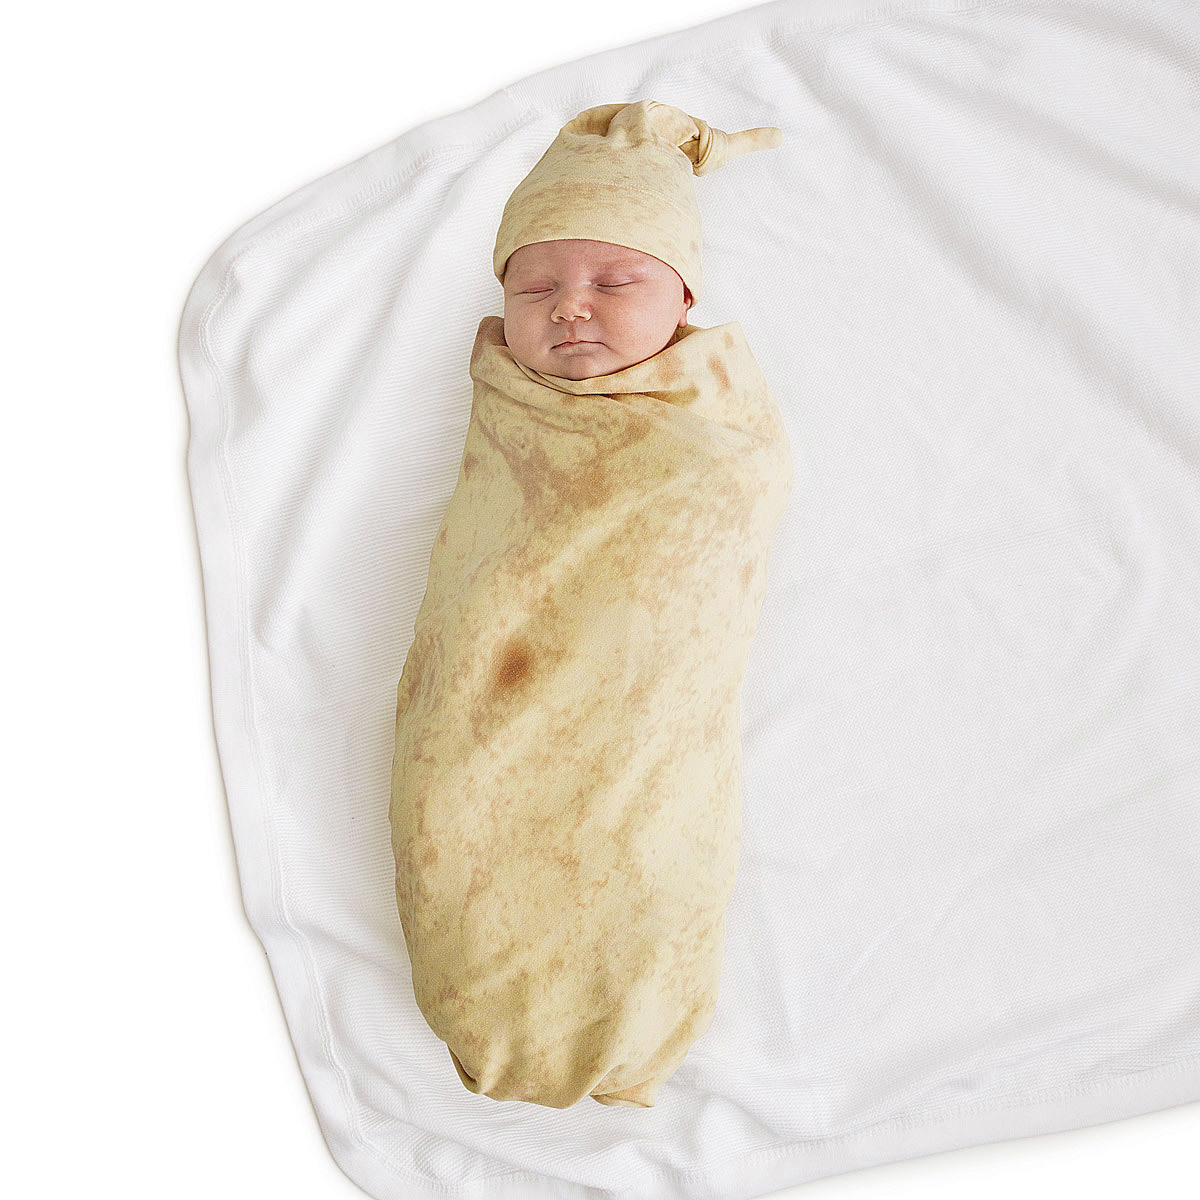 This tortilla baby wrap is just the thing for foodie parents.